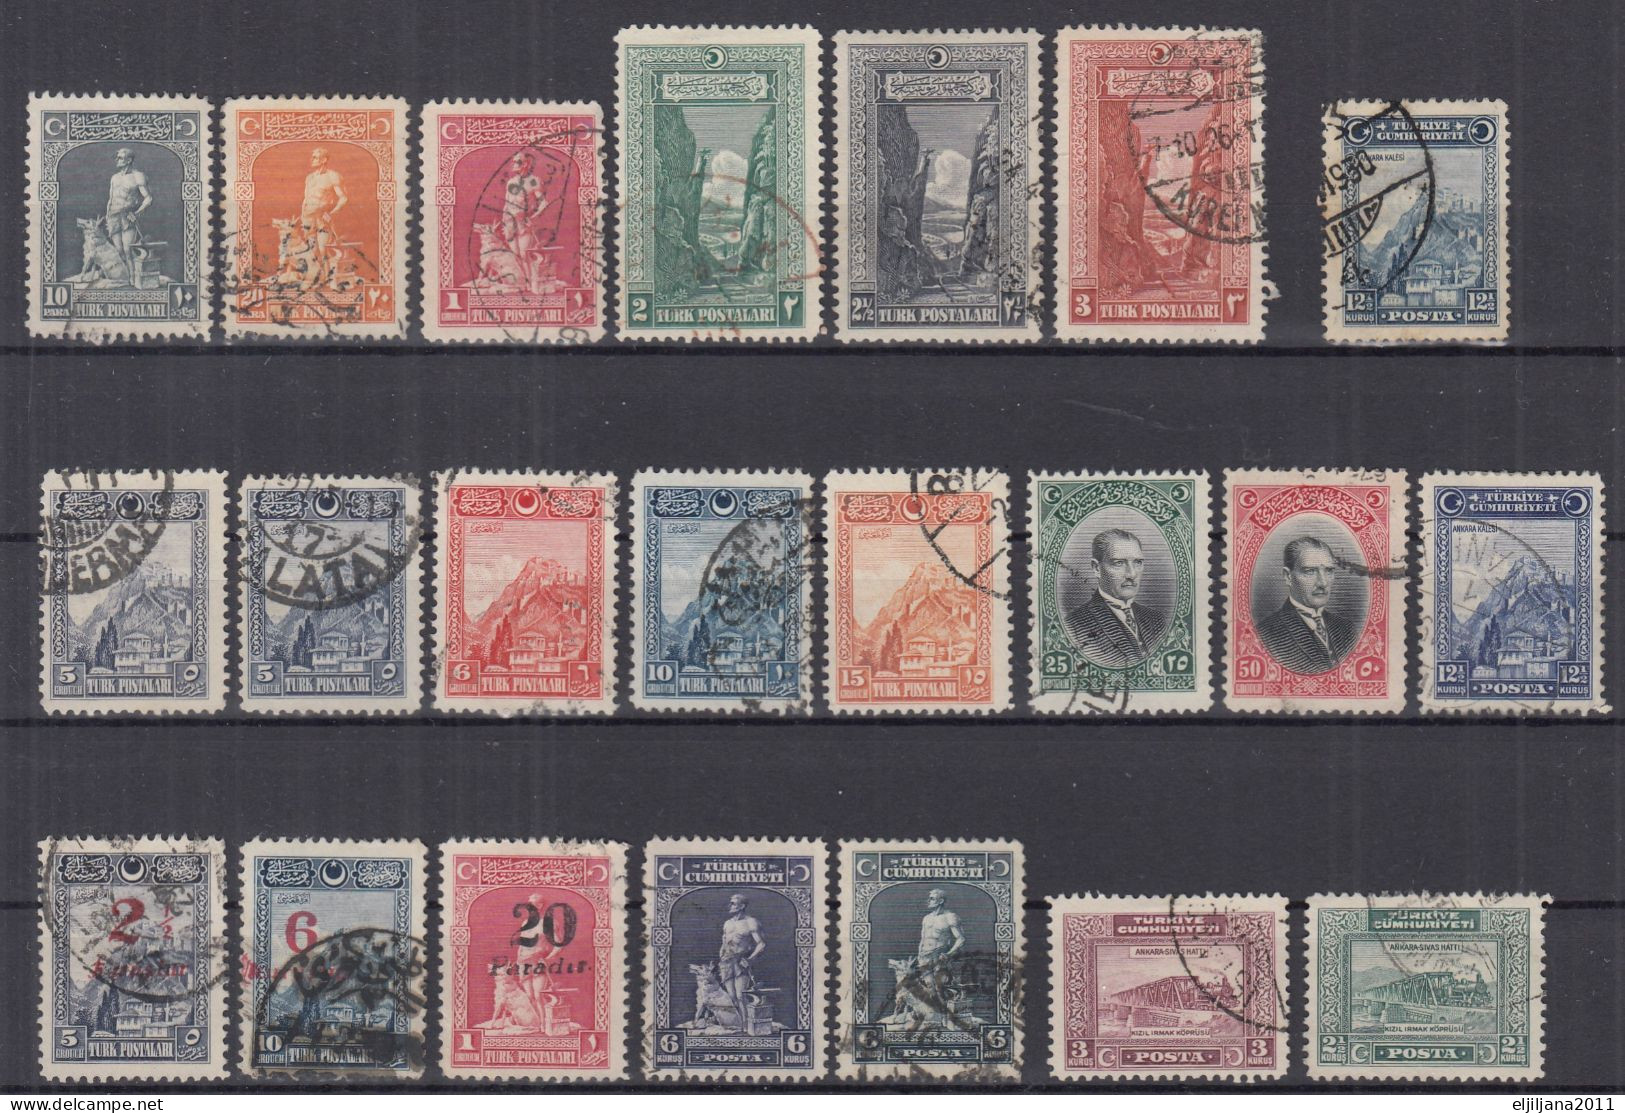 Action !! SALE !! 50 % OFF !! ⁕ Turkey 1926 - 1929 ⁕ Collection / Lot ⁕ 22v Used - Gebraucht